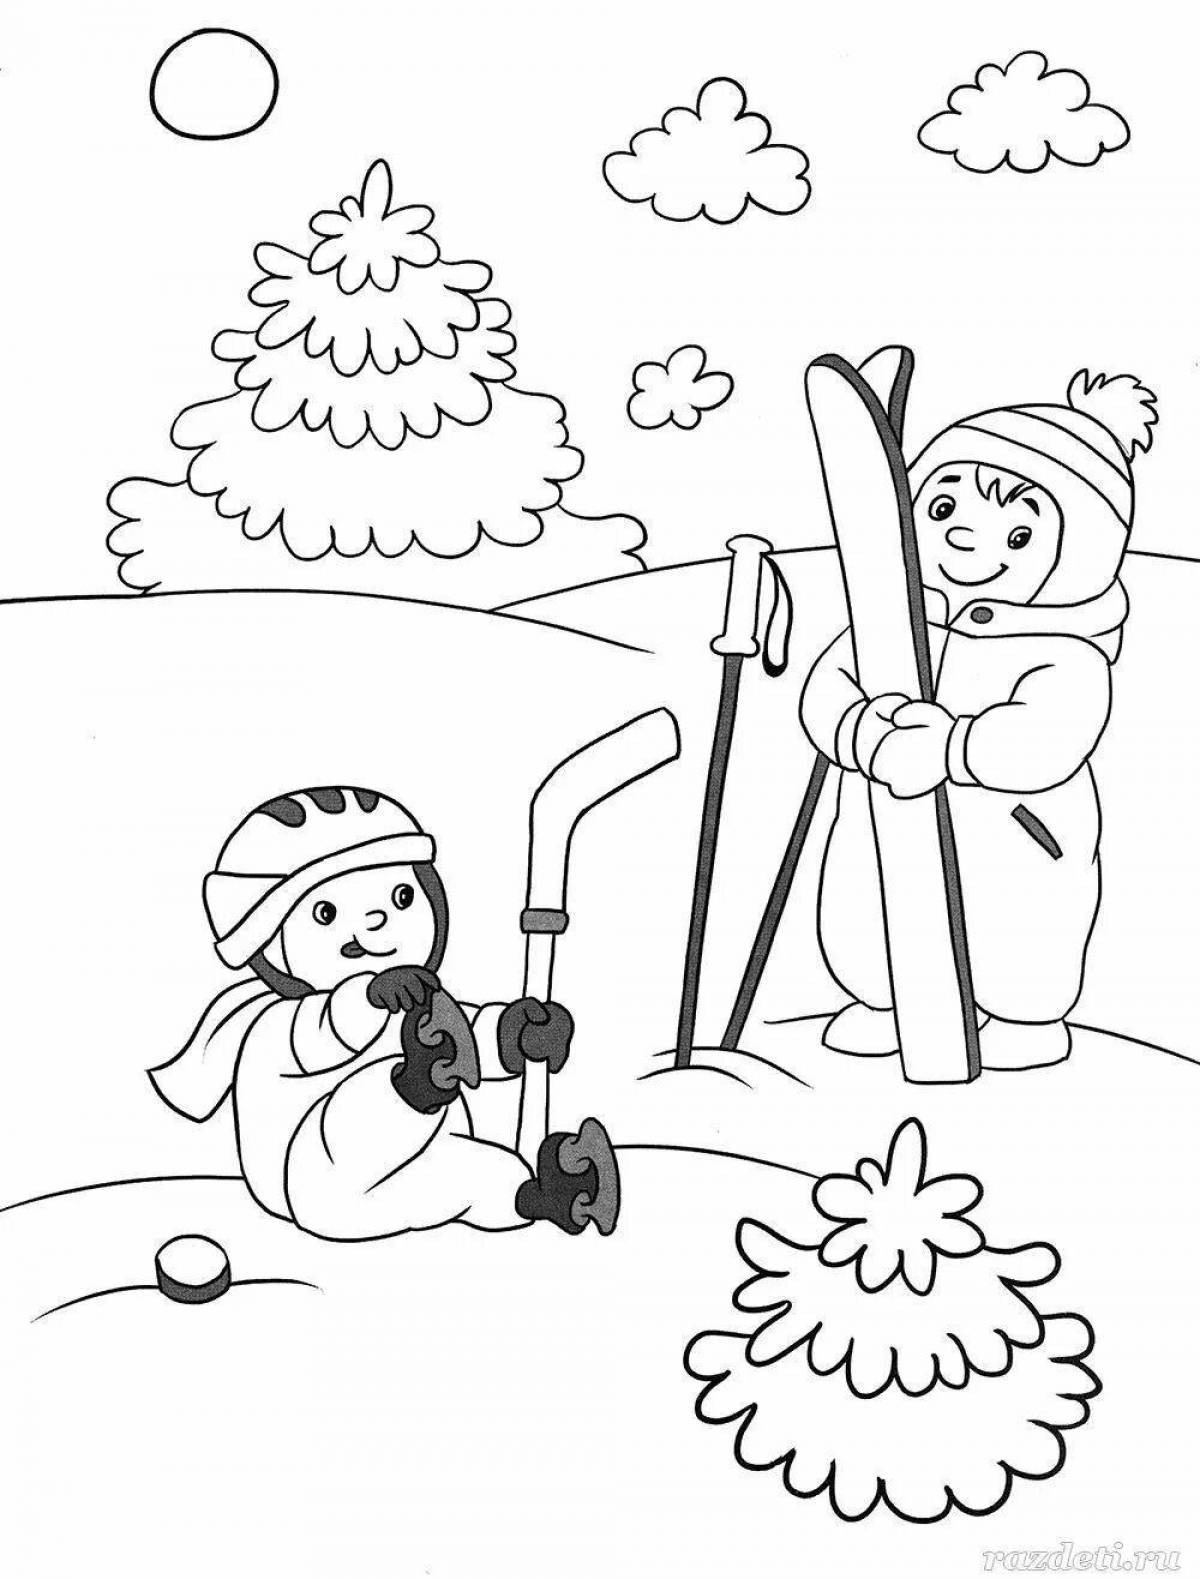 Safety winter coloring book for preschoolers